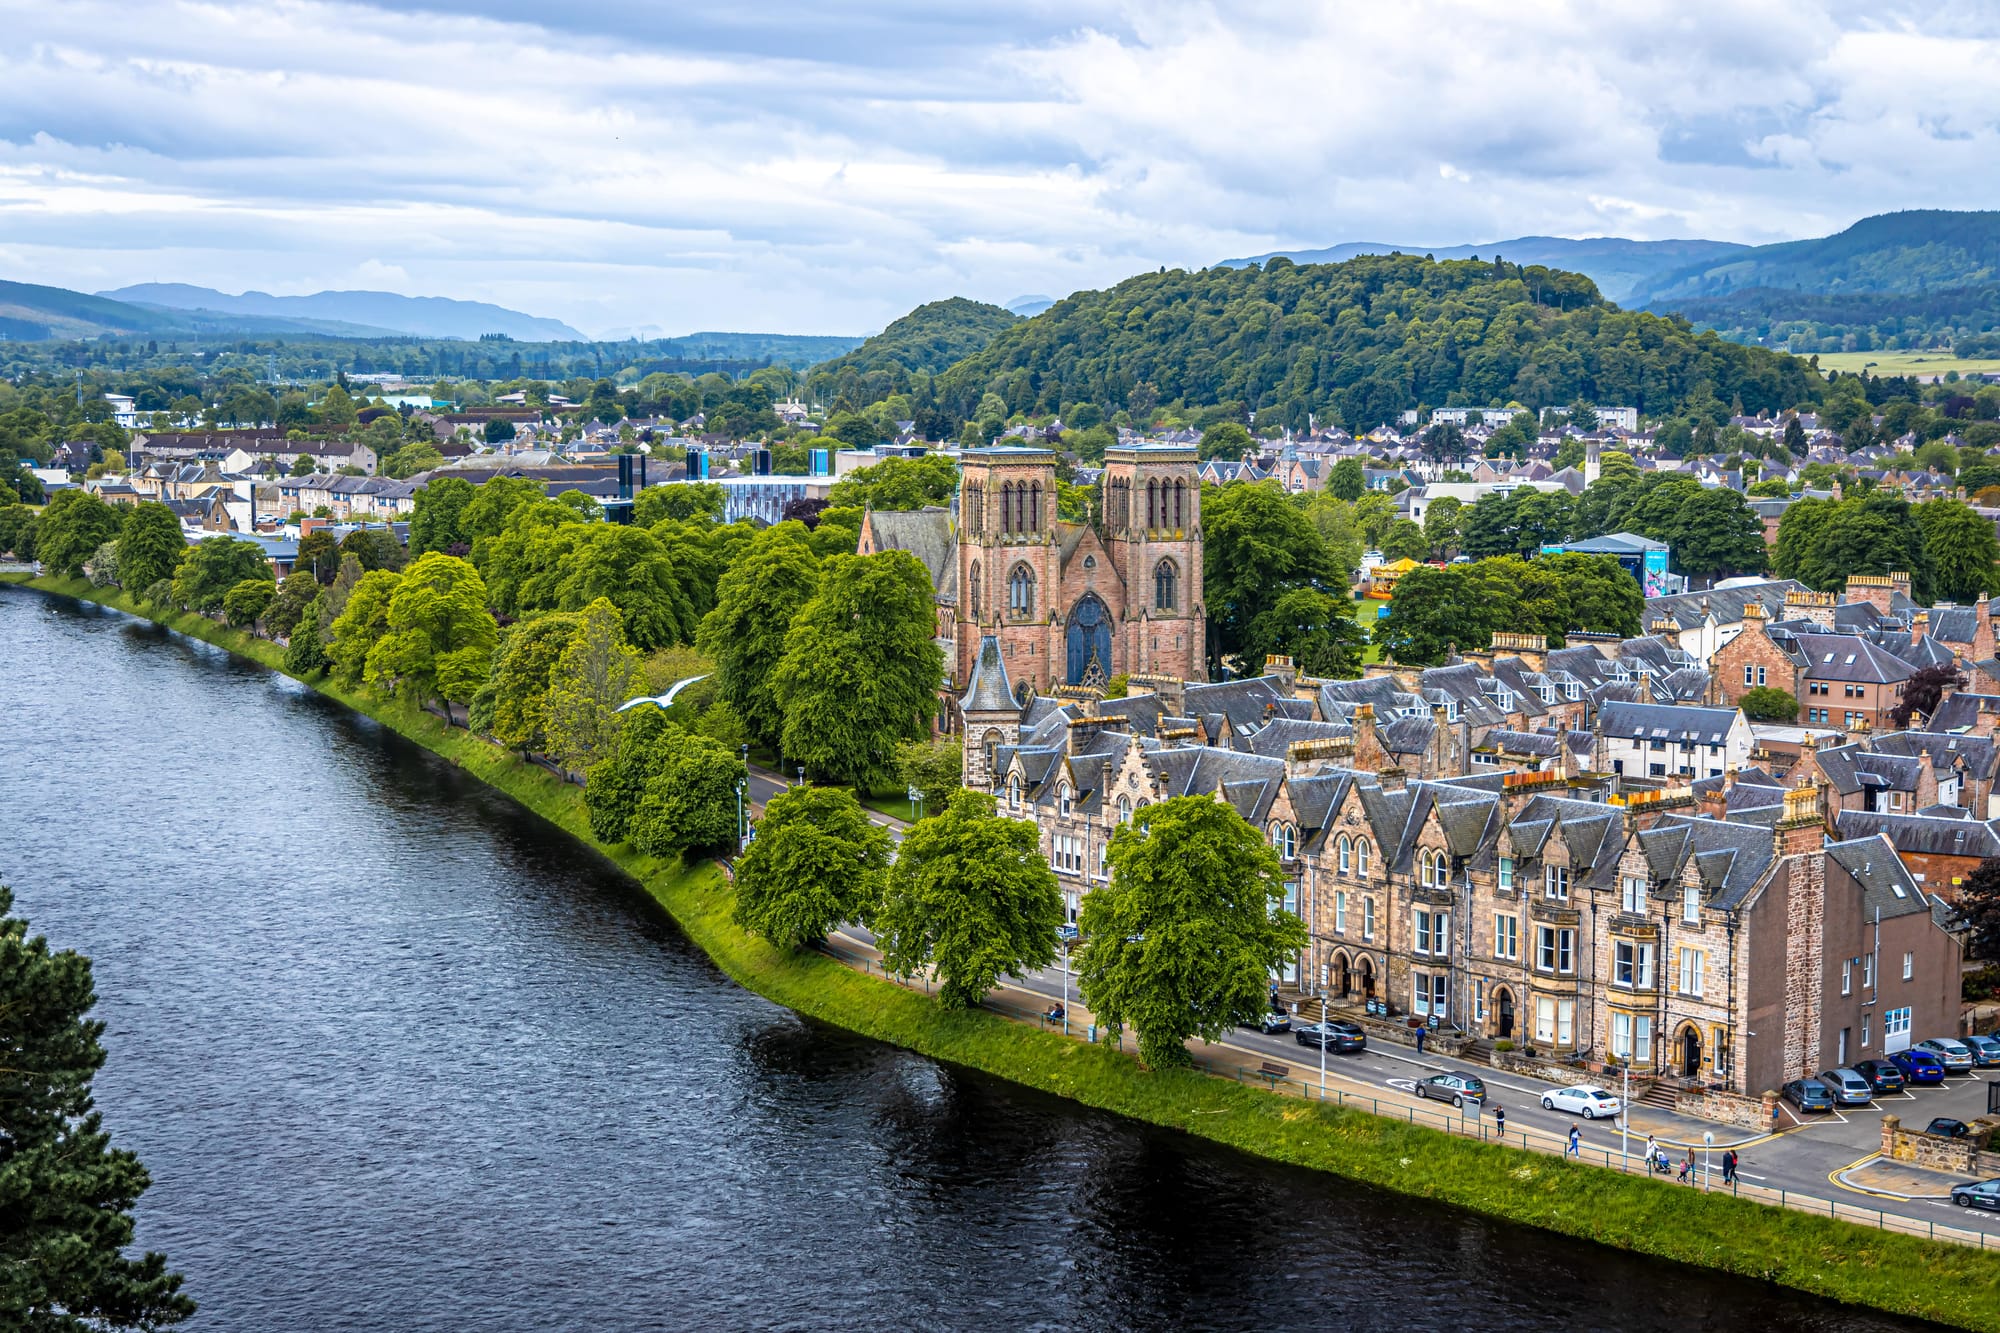 Inverness, typically the starting point for the North Coast 500.